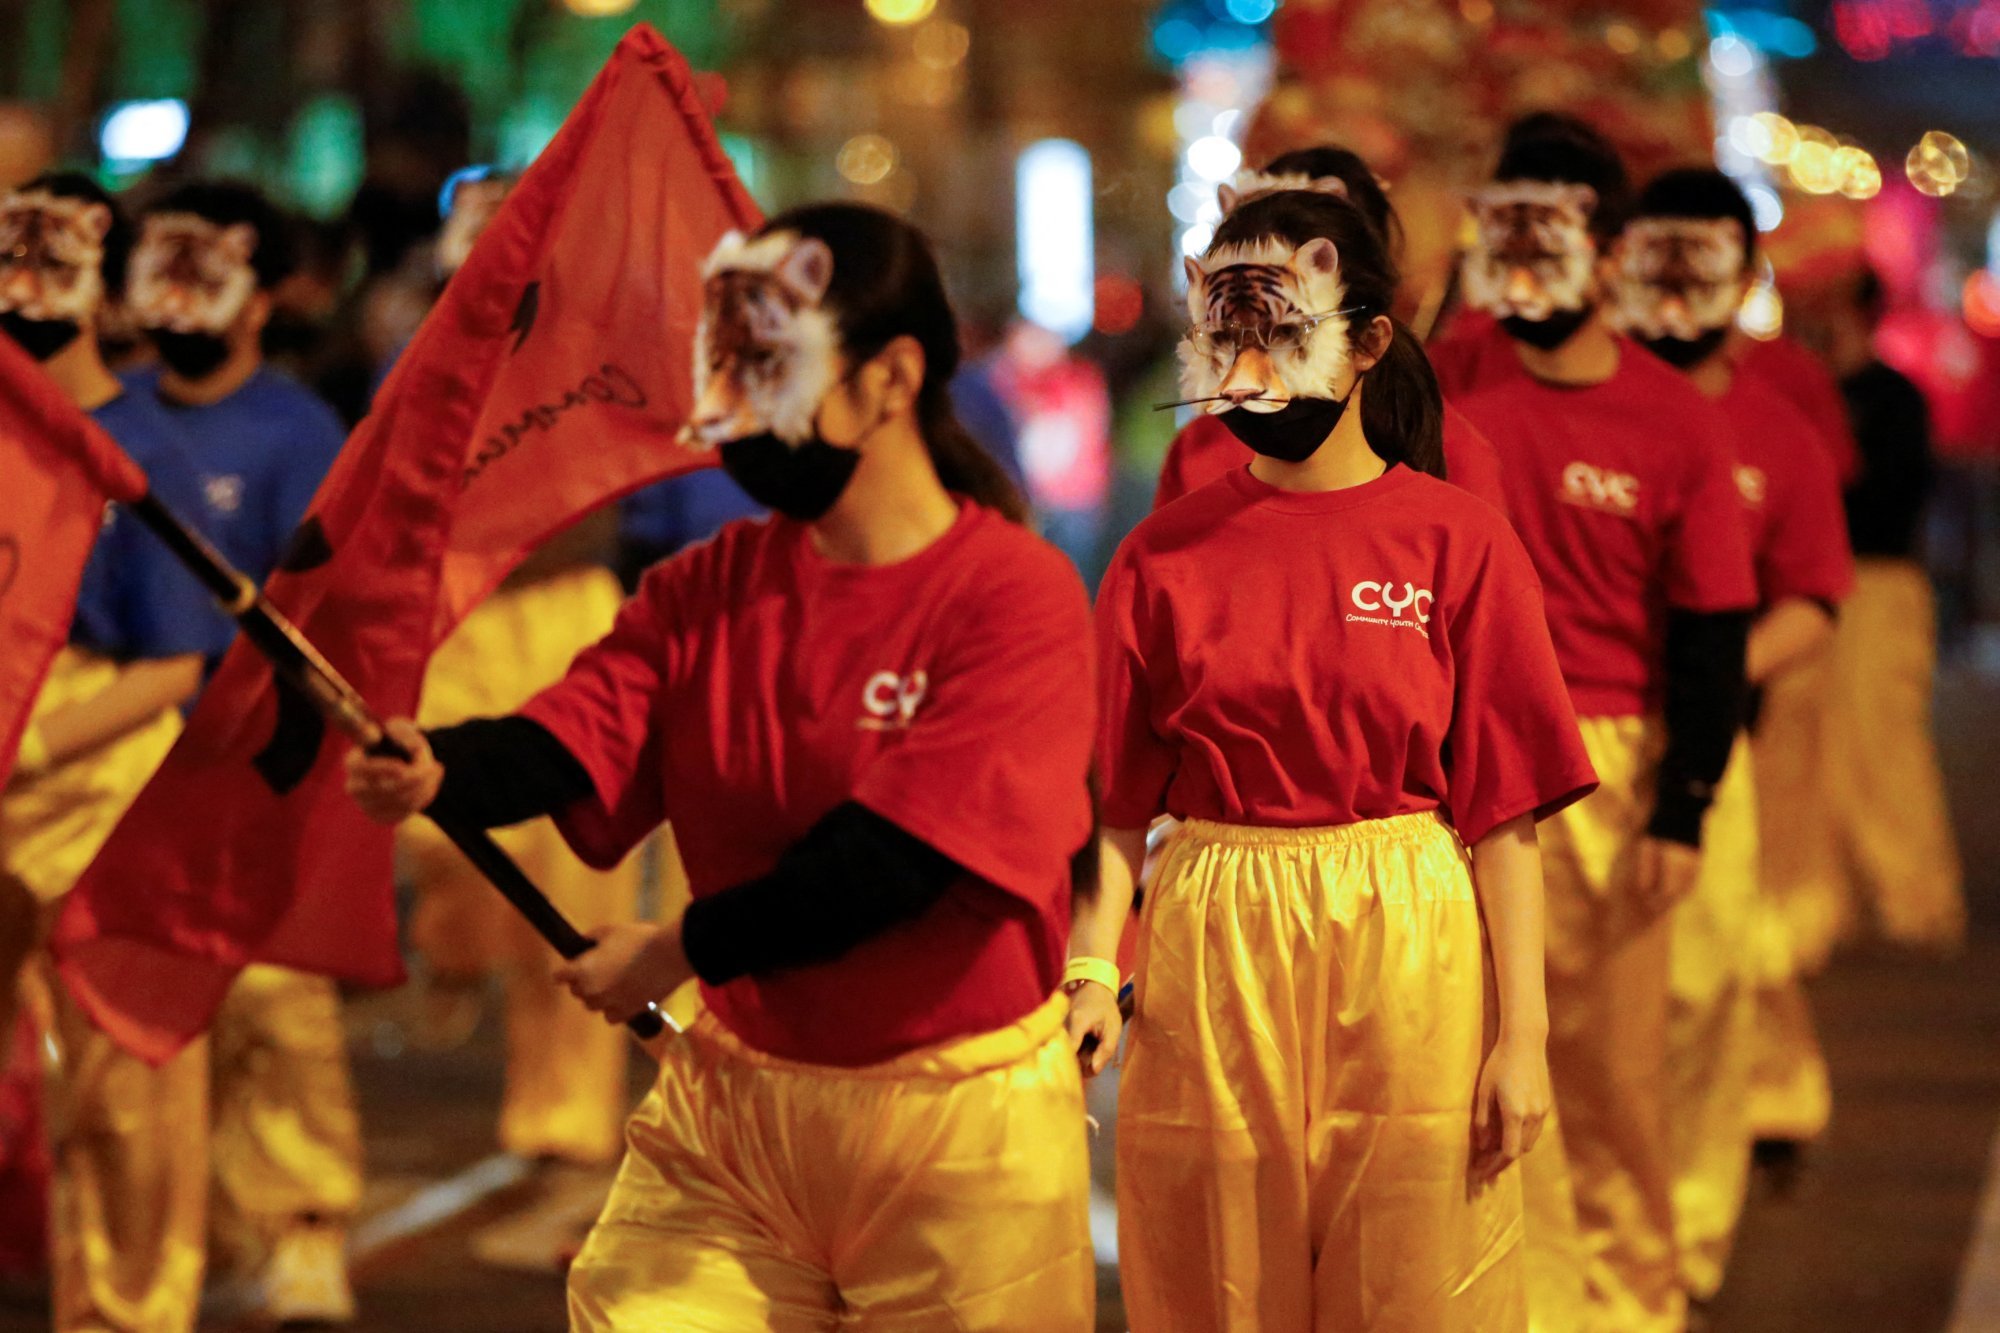 Young performers in tiger masks carry flags down Market Street as part of the annual Lunar New Year parade in San Francisco’s famed Chinatown neighbourhood on February 19, 2022. Photo: Reuters